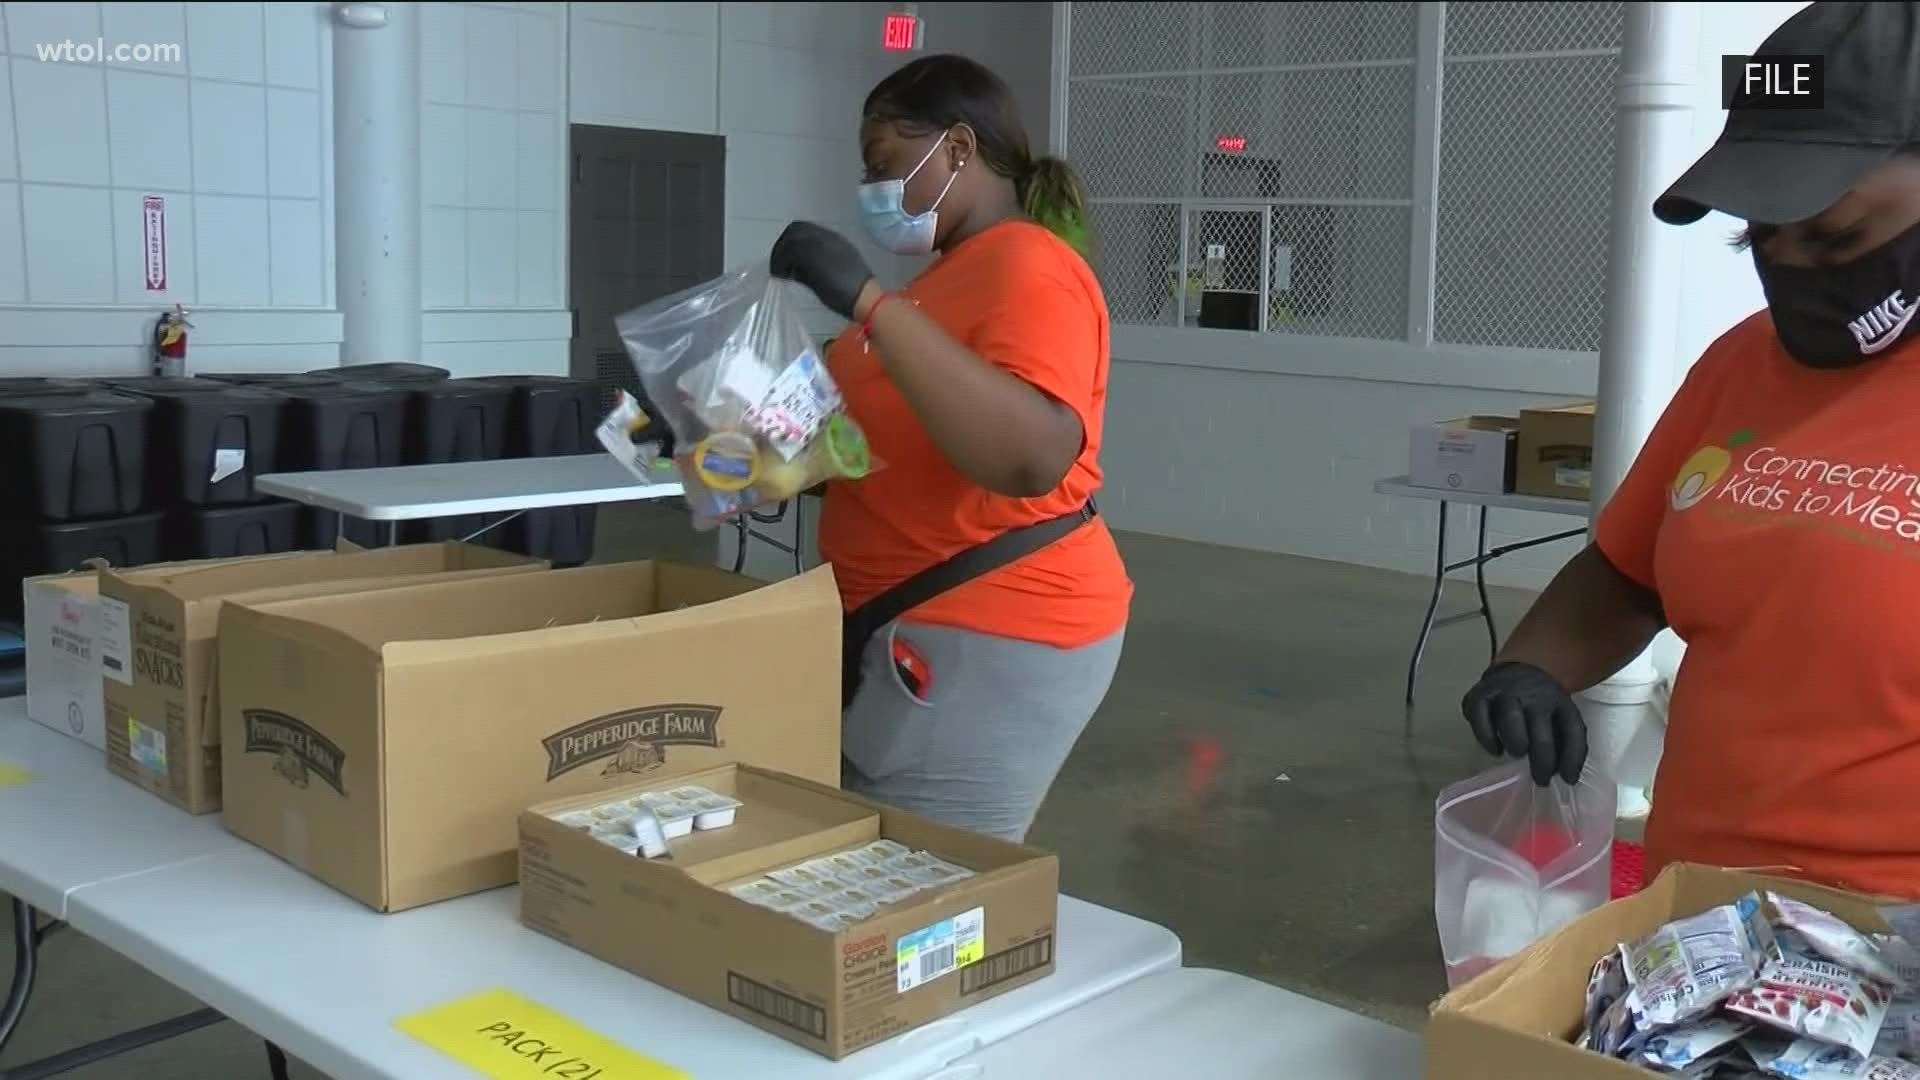 The Ottawa County Family Advocacy group says they handed out 88,000 free meals in summer 2021, but will only be able to hand out a few thousand this summer.